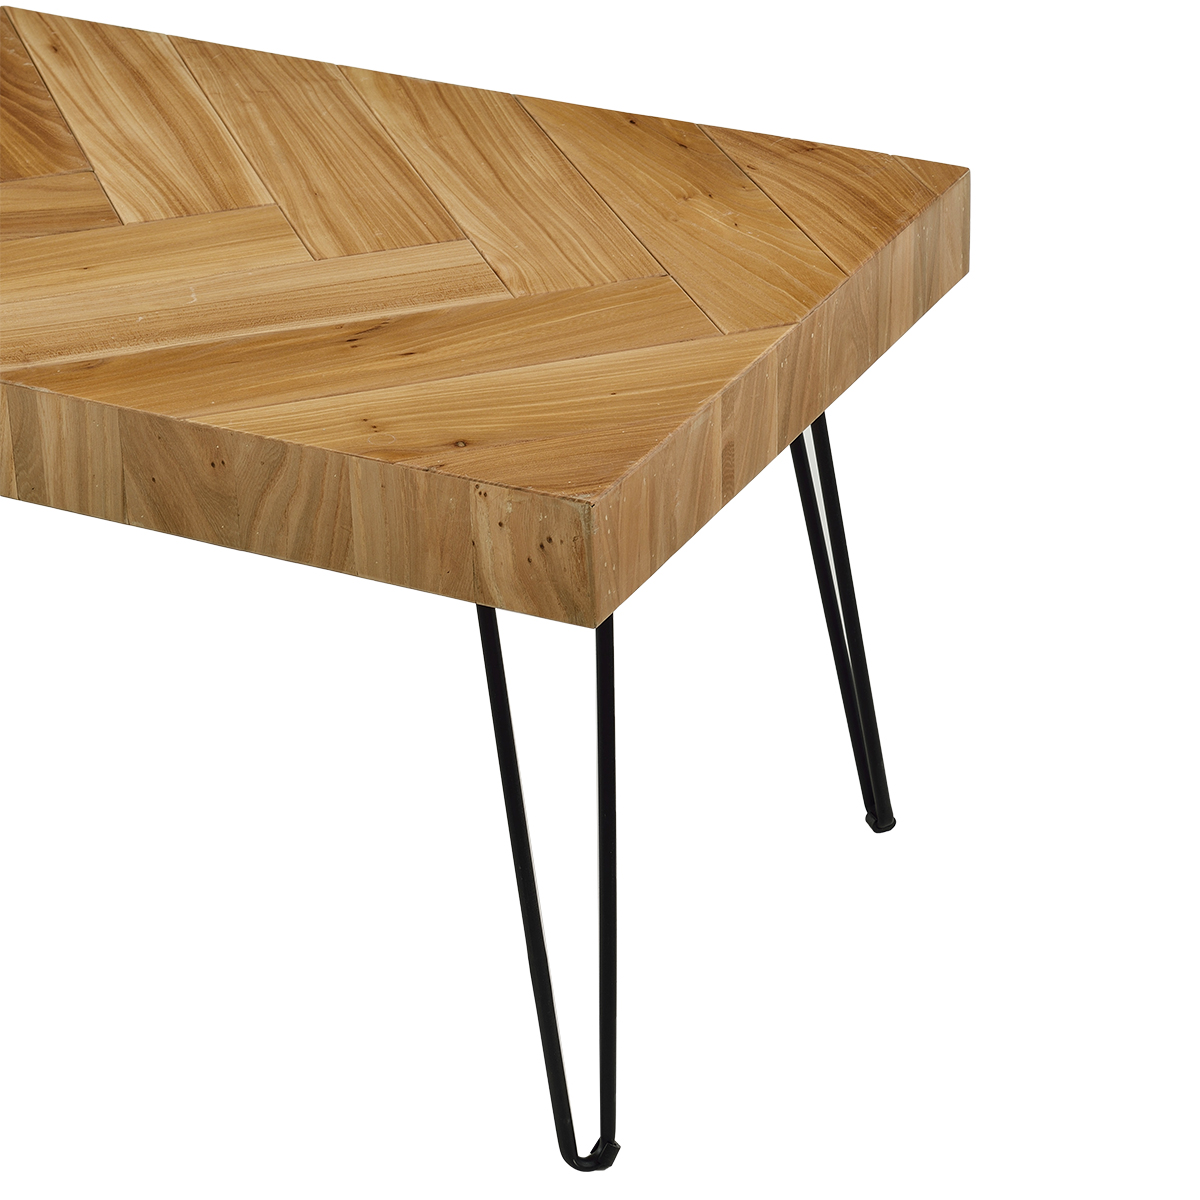 Old elm Coffee Table, 43.3" Modern Coffee Table with Metal Hairpin Legs, Solid Wood Cocktail Table with Chevron Pattern, Sturdy Glossy Finish Rectangular Center Table Side Table for Living Room, L2154 - image 5 of 8